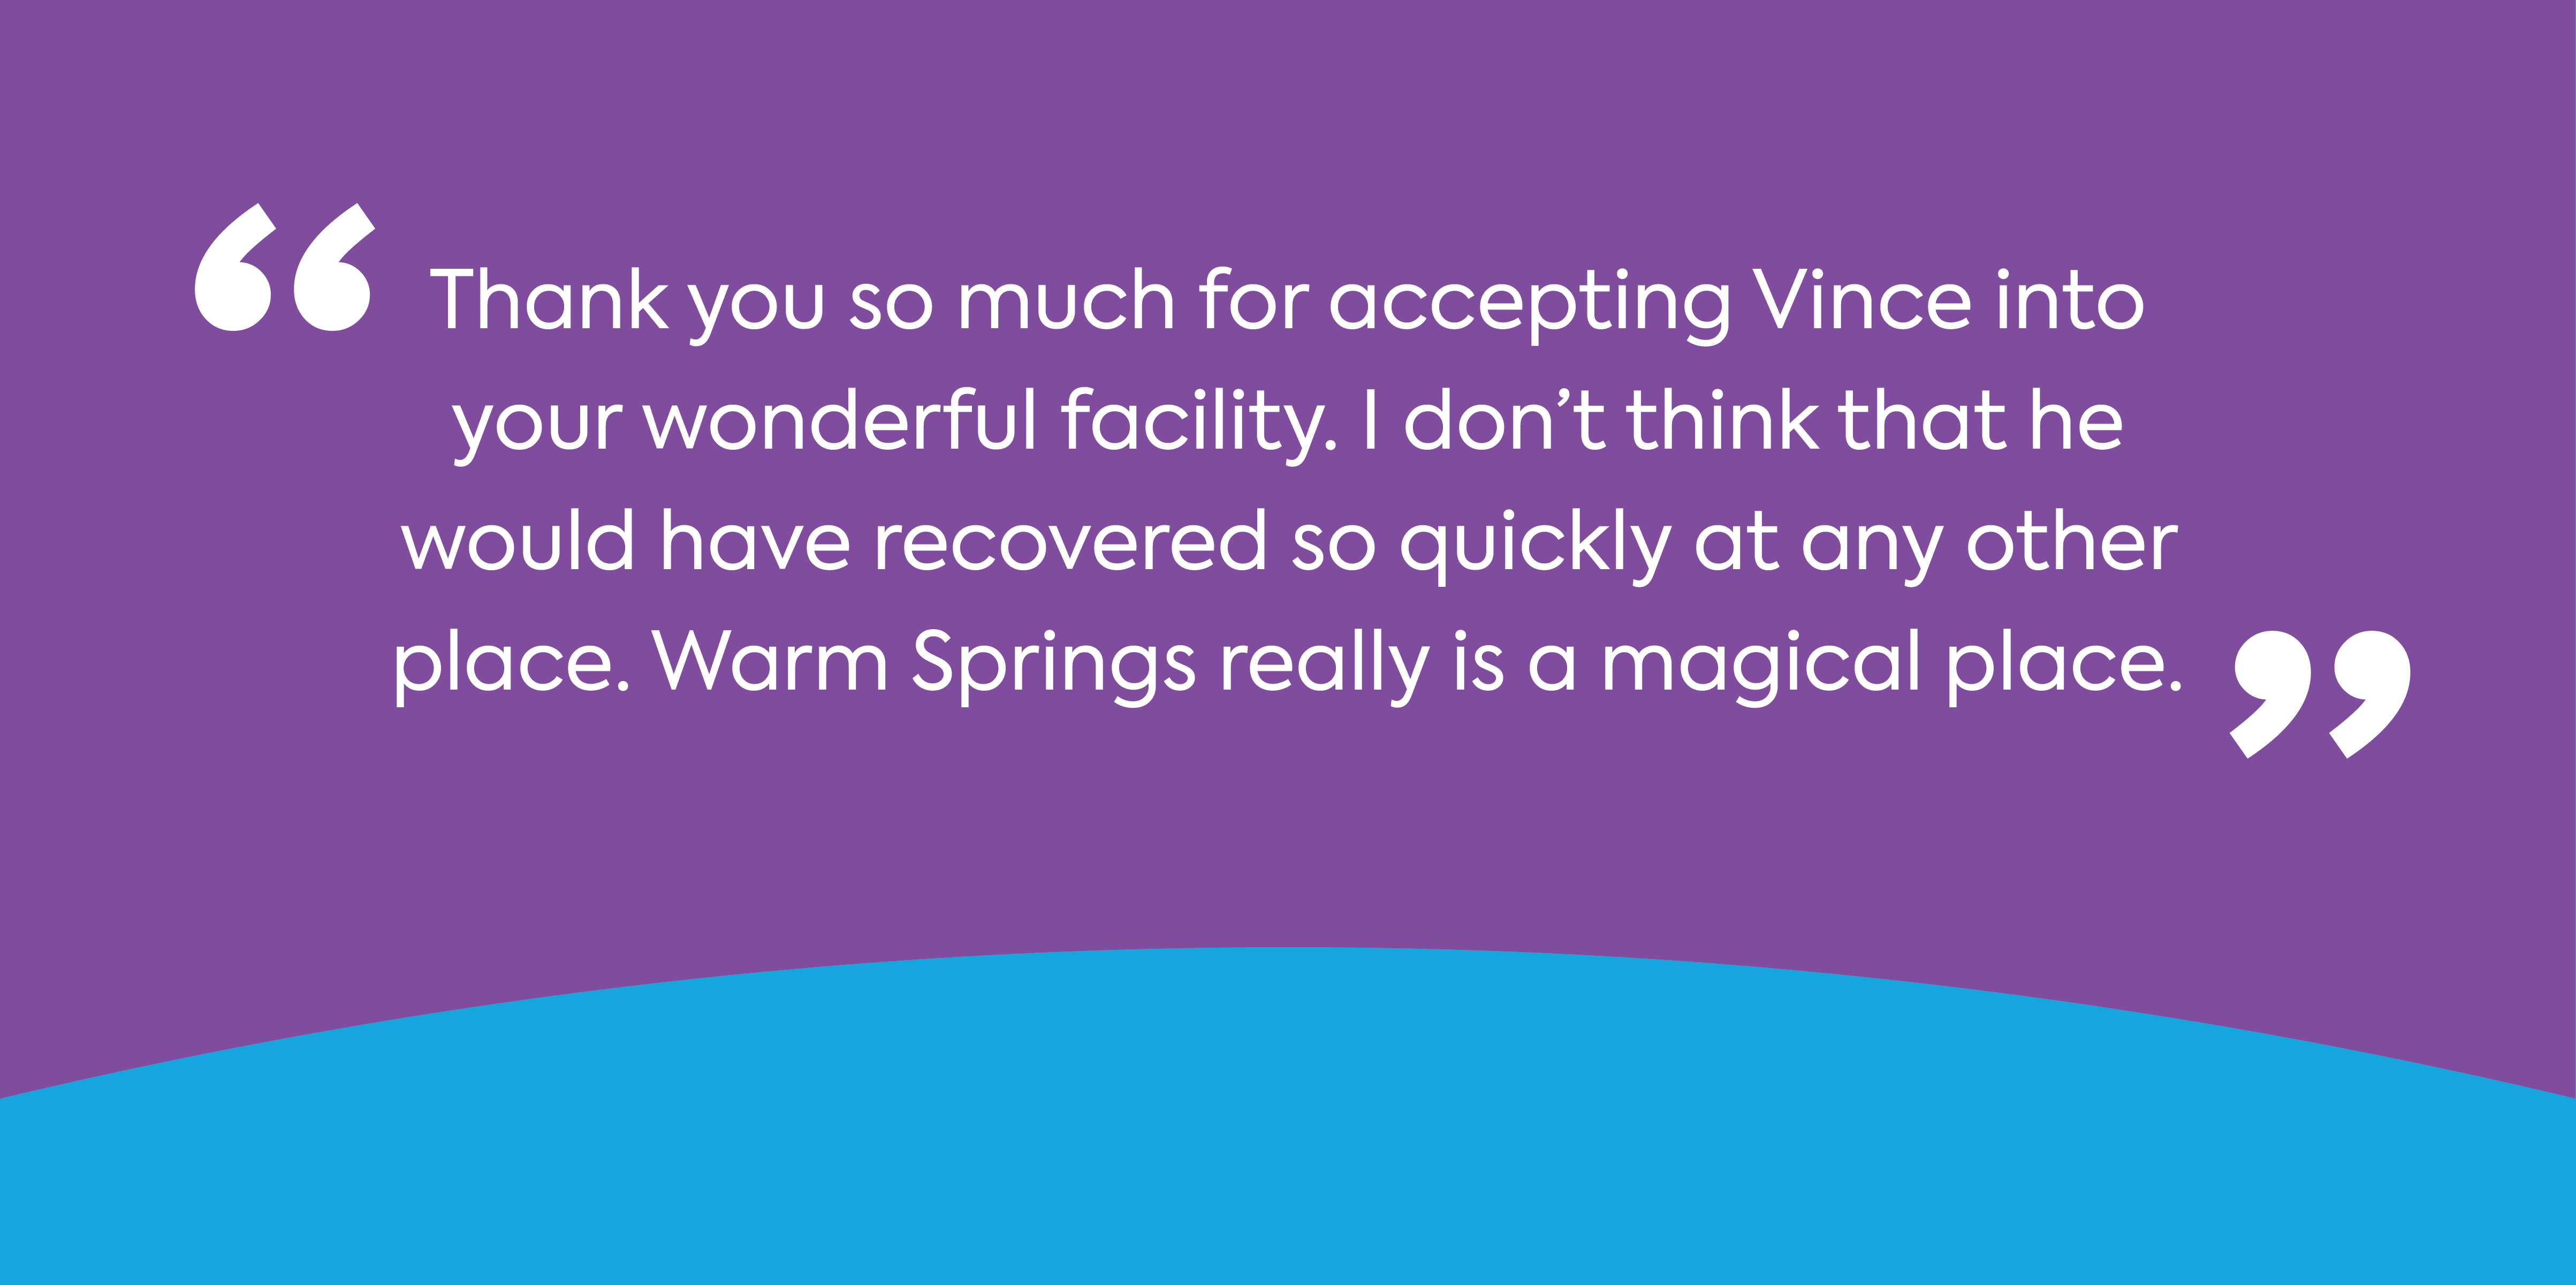 Text: Thank you so much for accepting Vince into your wonderful facility. I don't think that he would have recovered so quickly at any other place.  really is a magical place.